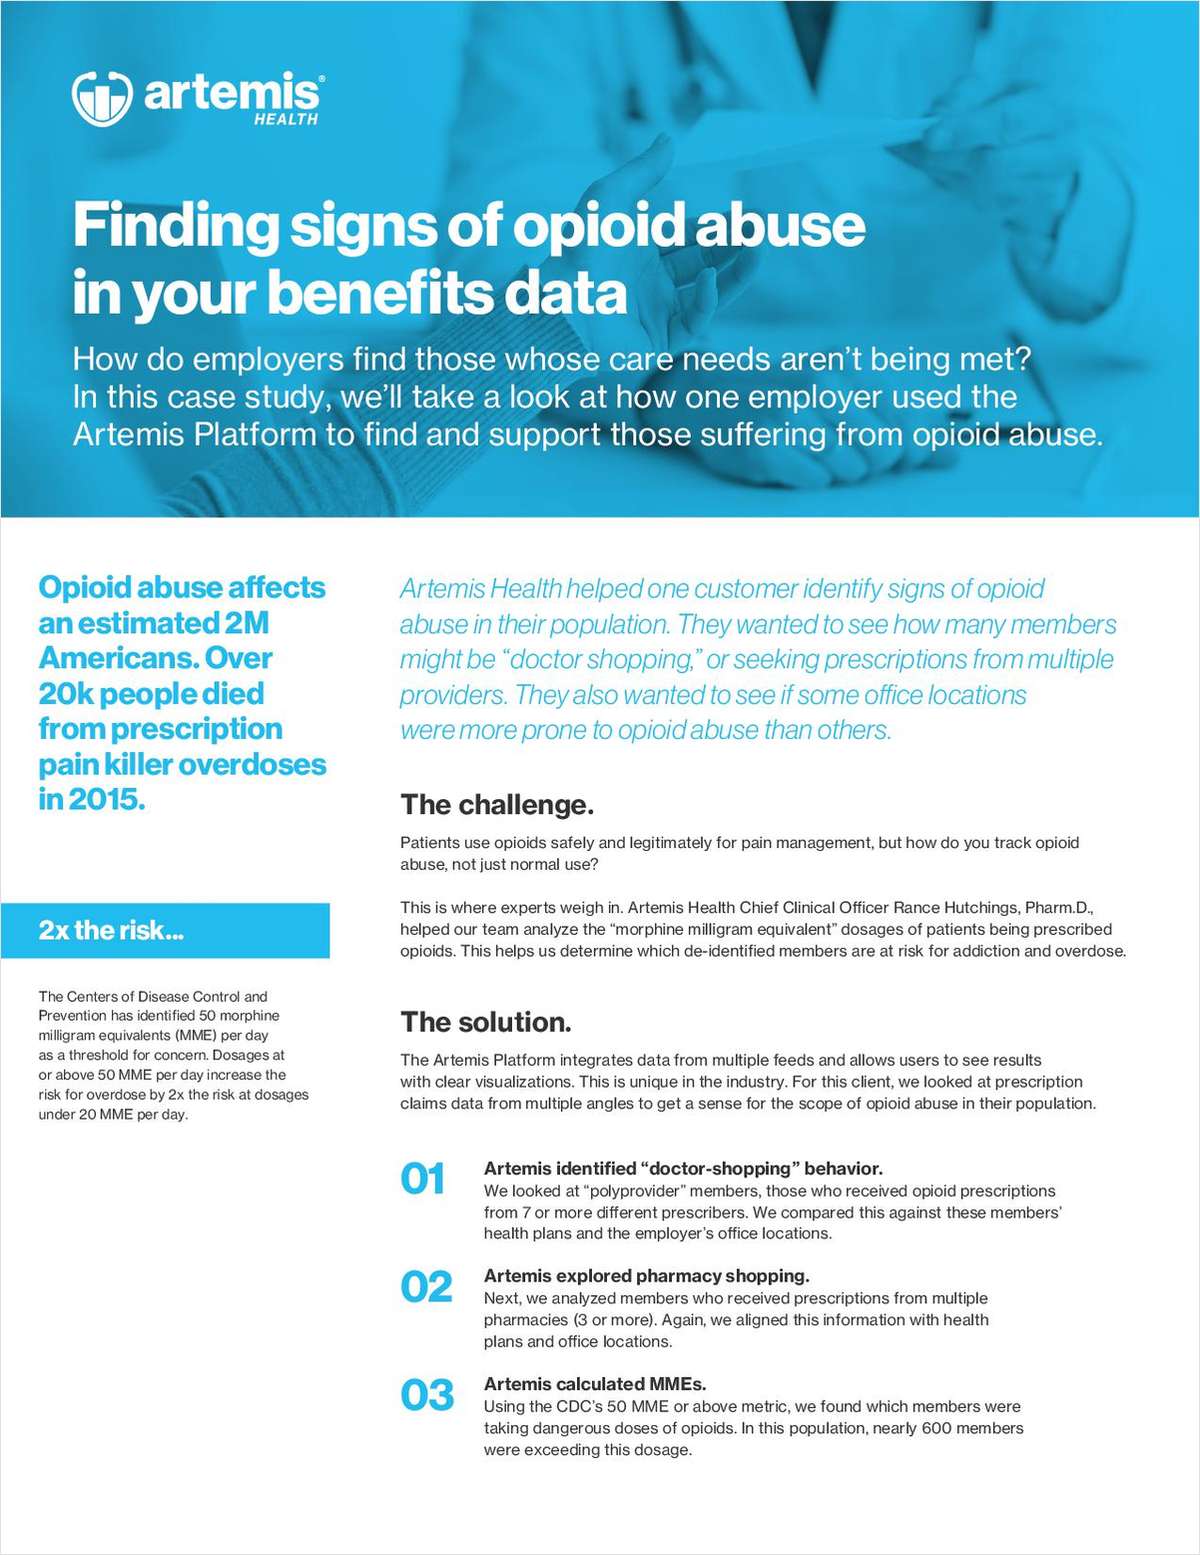 Are You Finding Signs Of Opioid Abuse In Your Health Data?